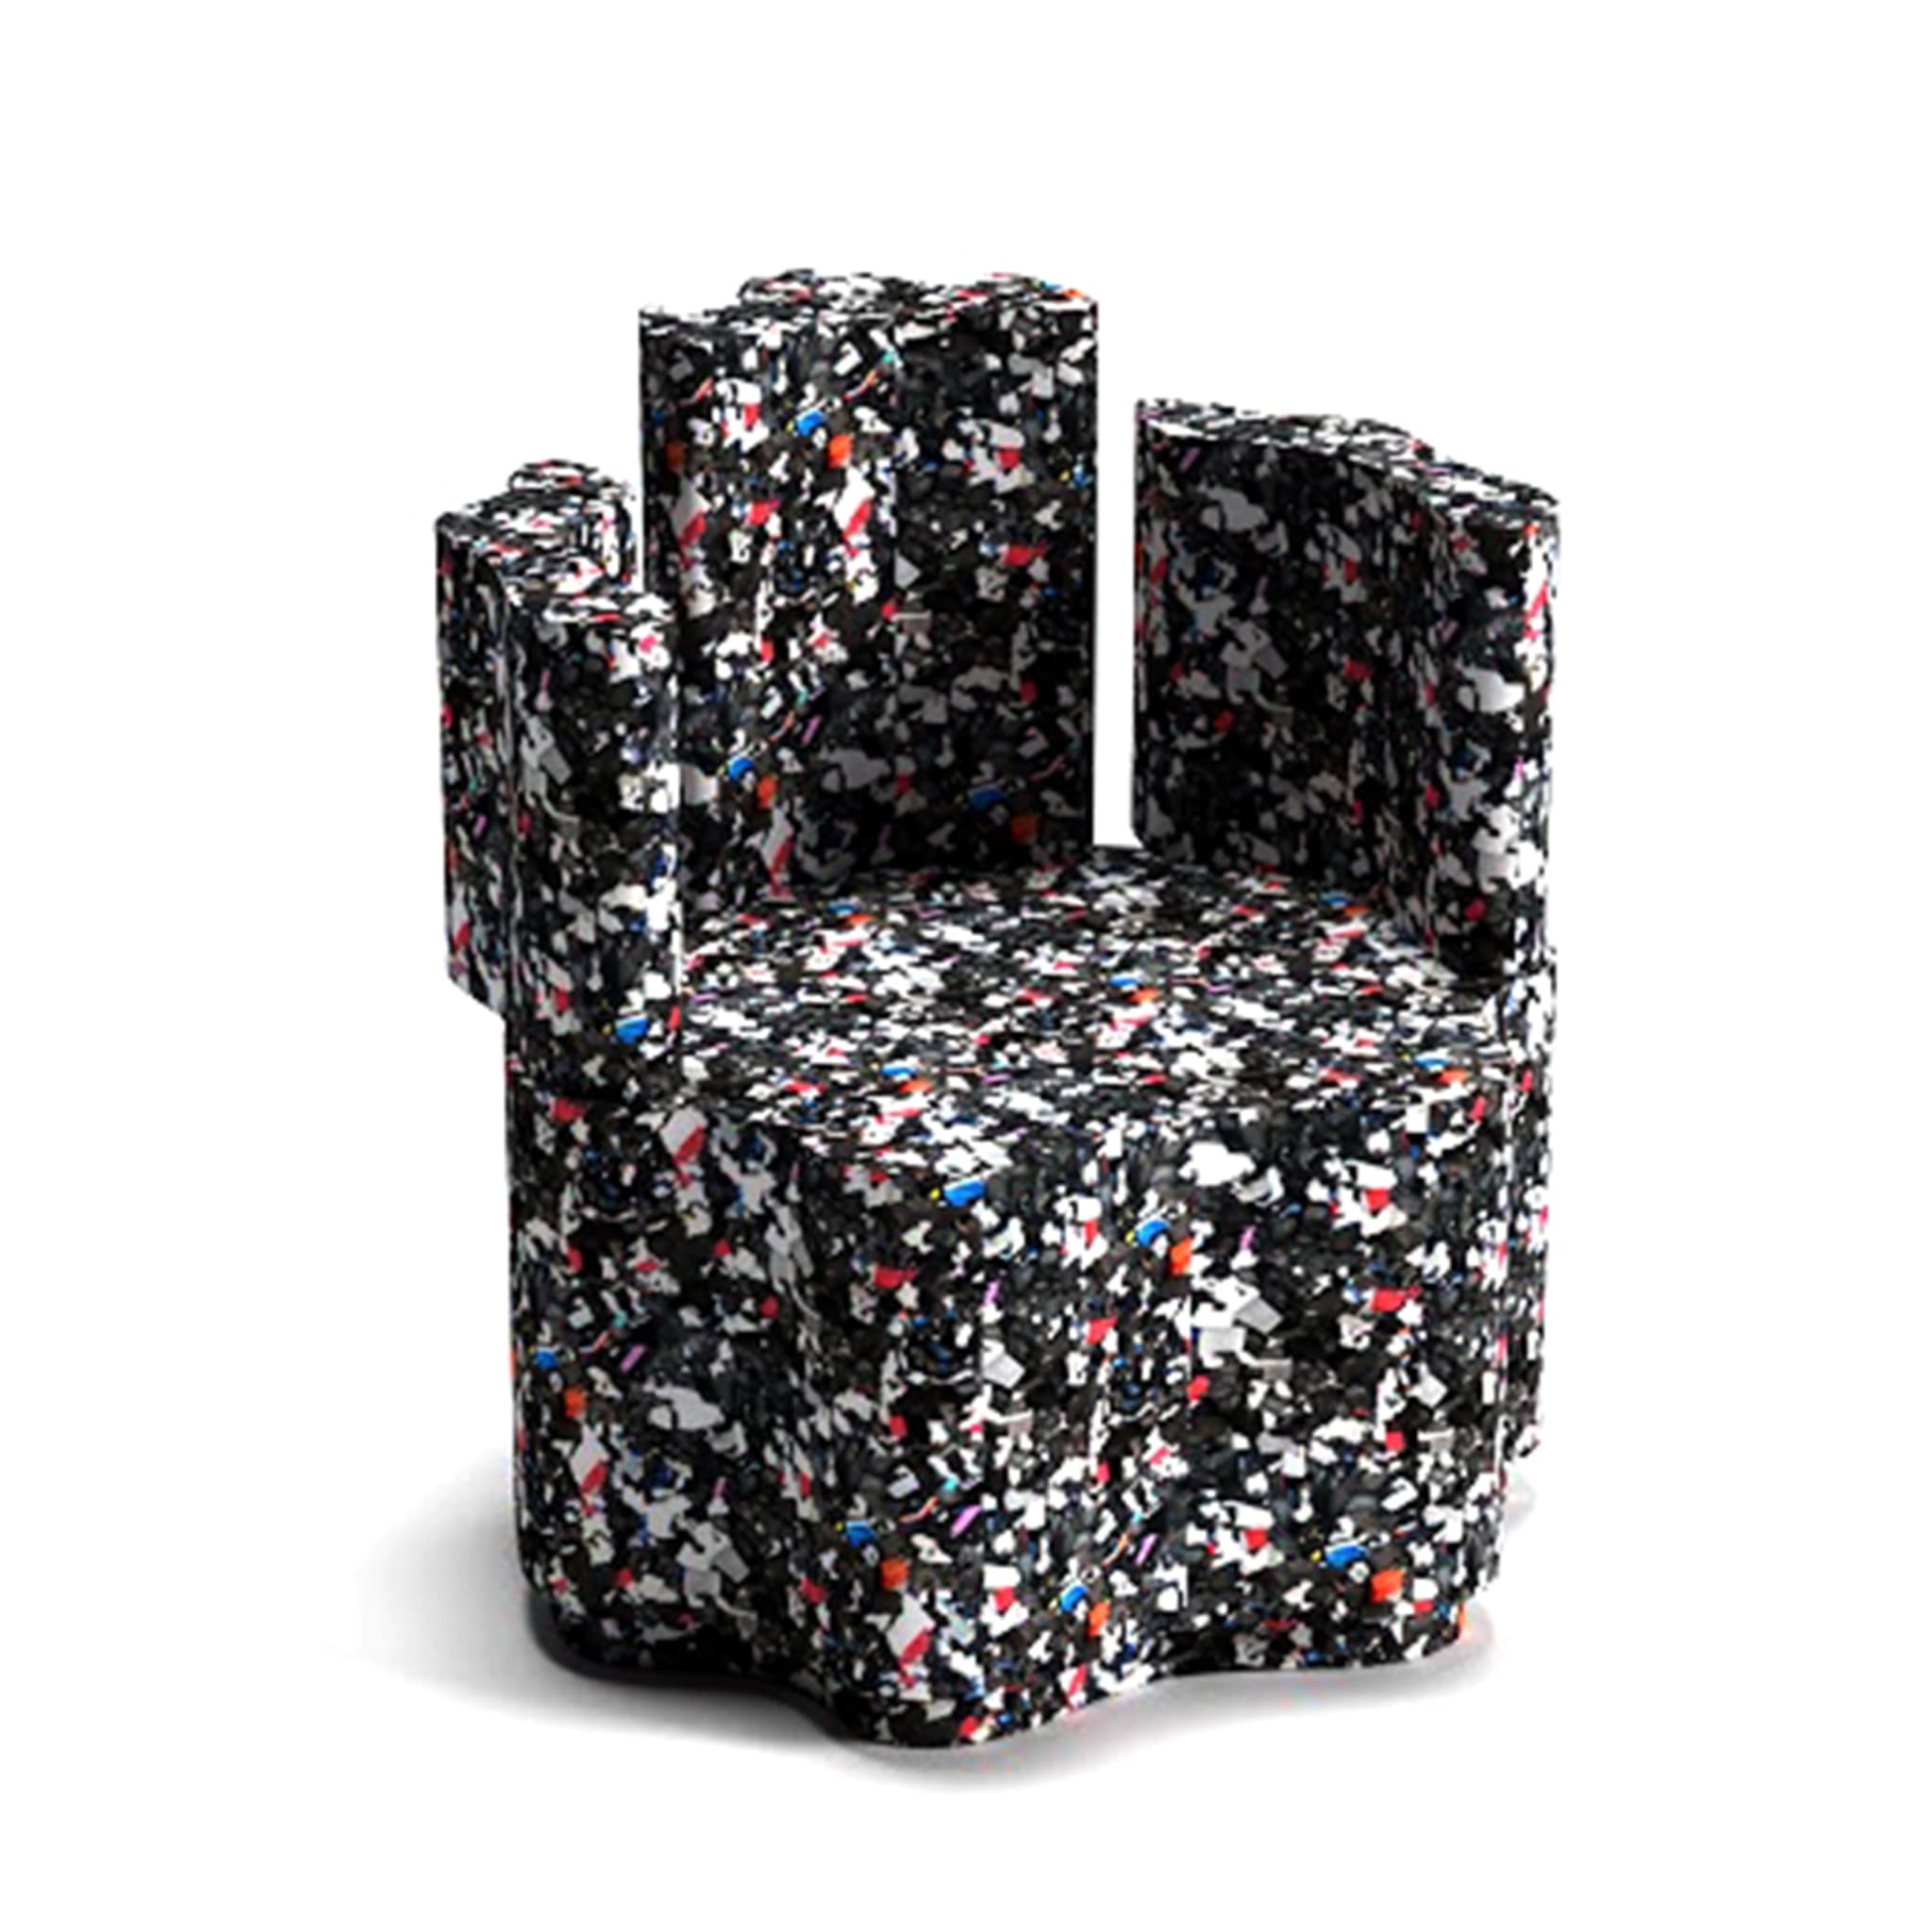 Patatina Black Recycled Armchair By Clemence Seilles - Alternative view 1